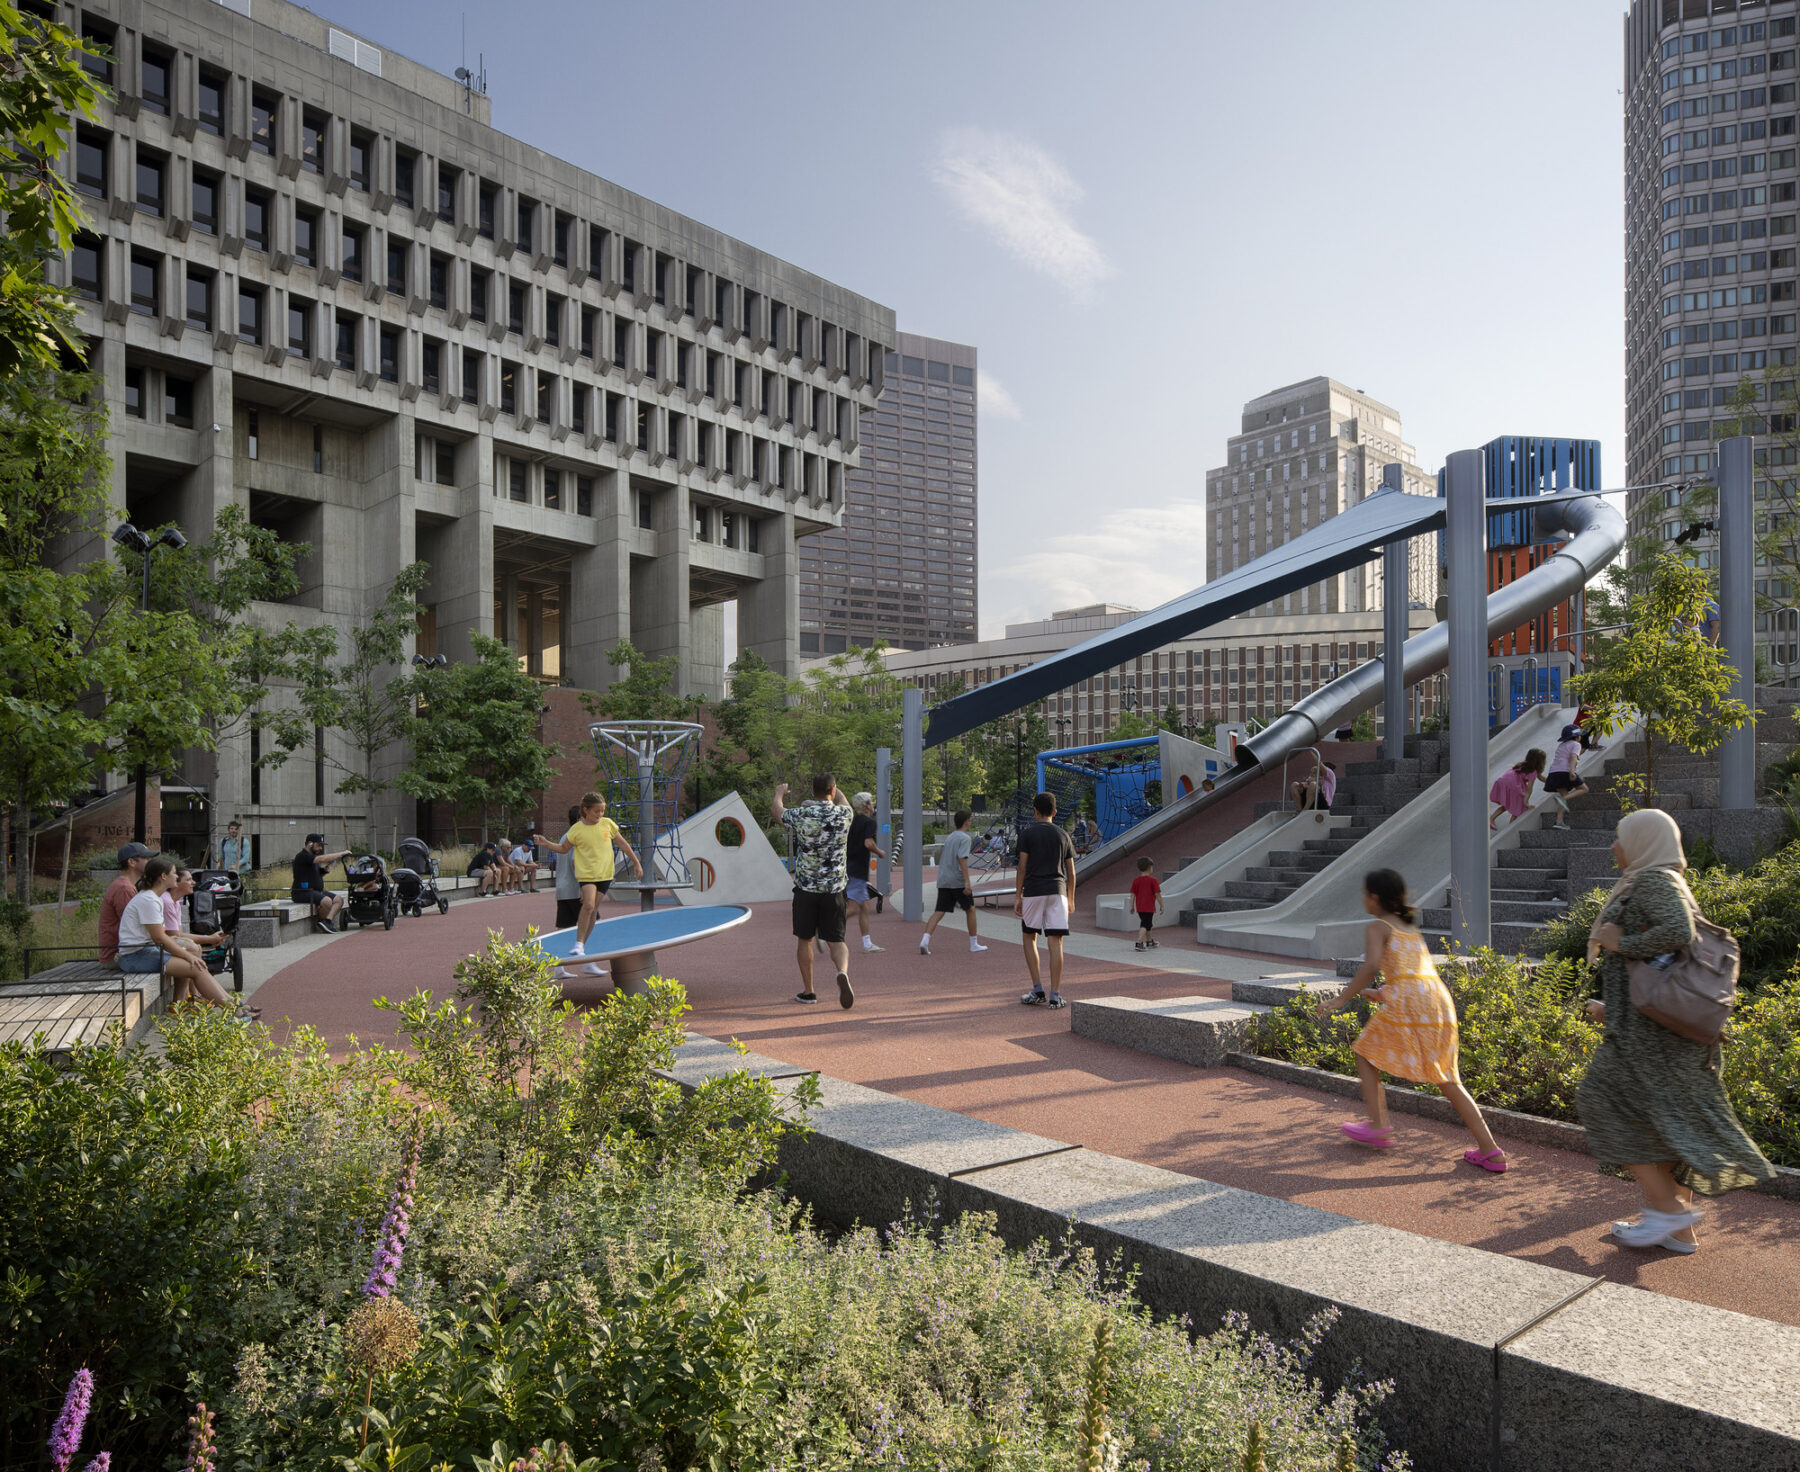 Afternoon photo: vegetation in the foreground, children slide and frolic, and parents watch, at the playscape adjacent to Boston City Hall